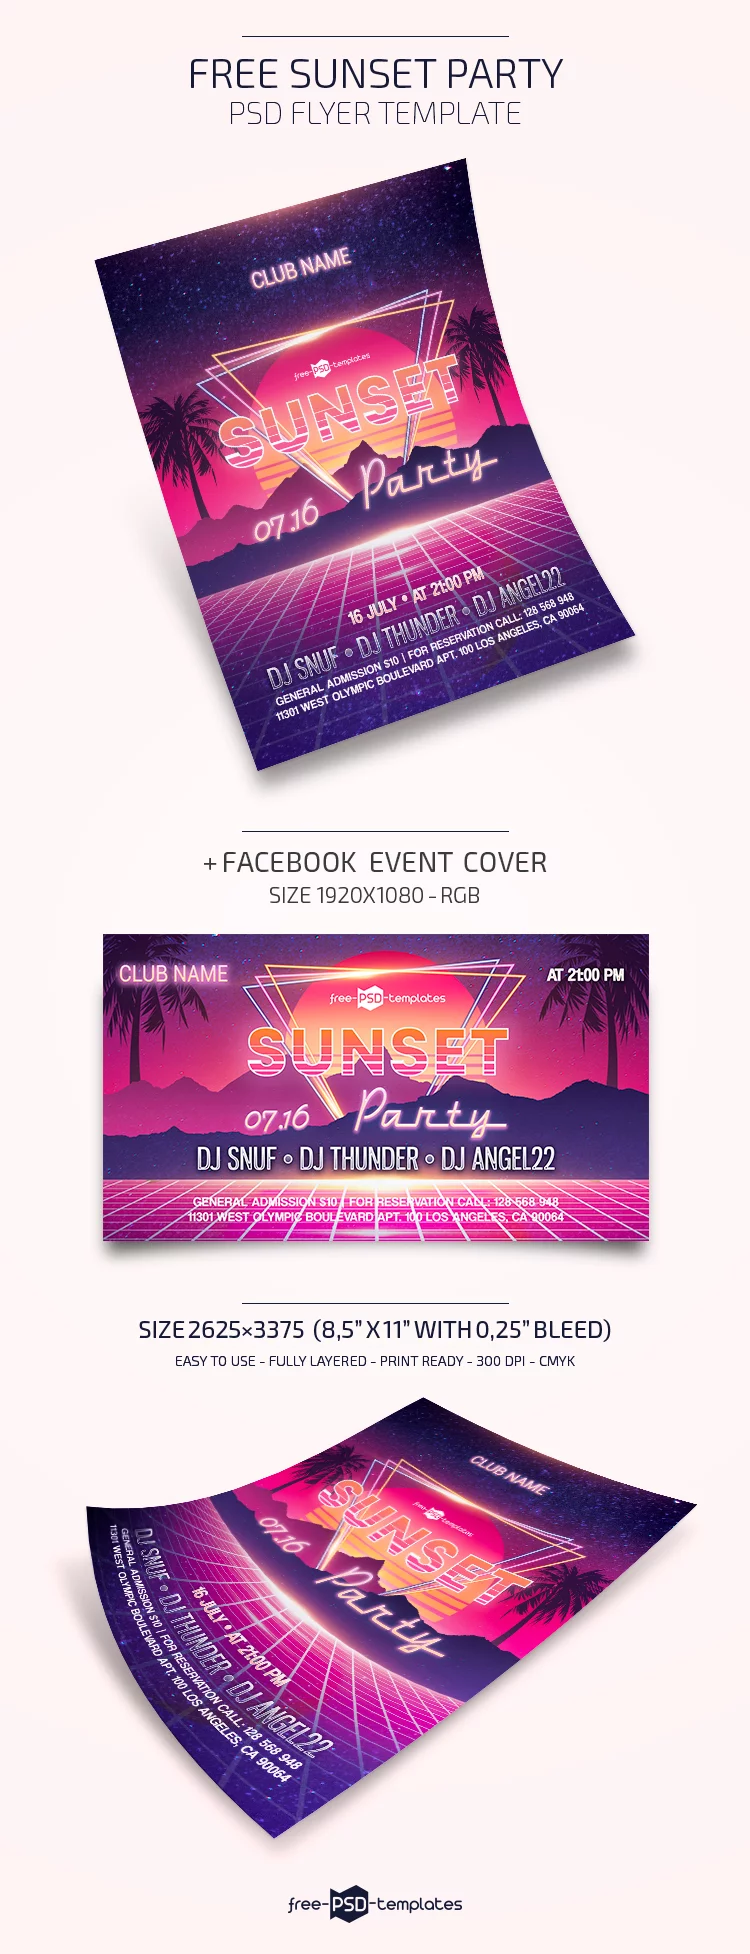 Free Sunset Party Flyer in PSD